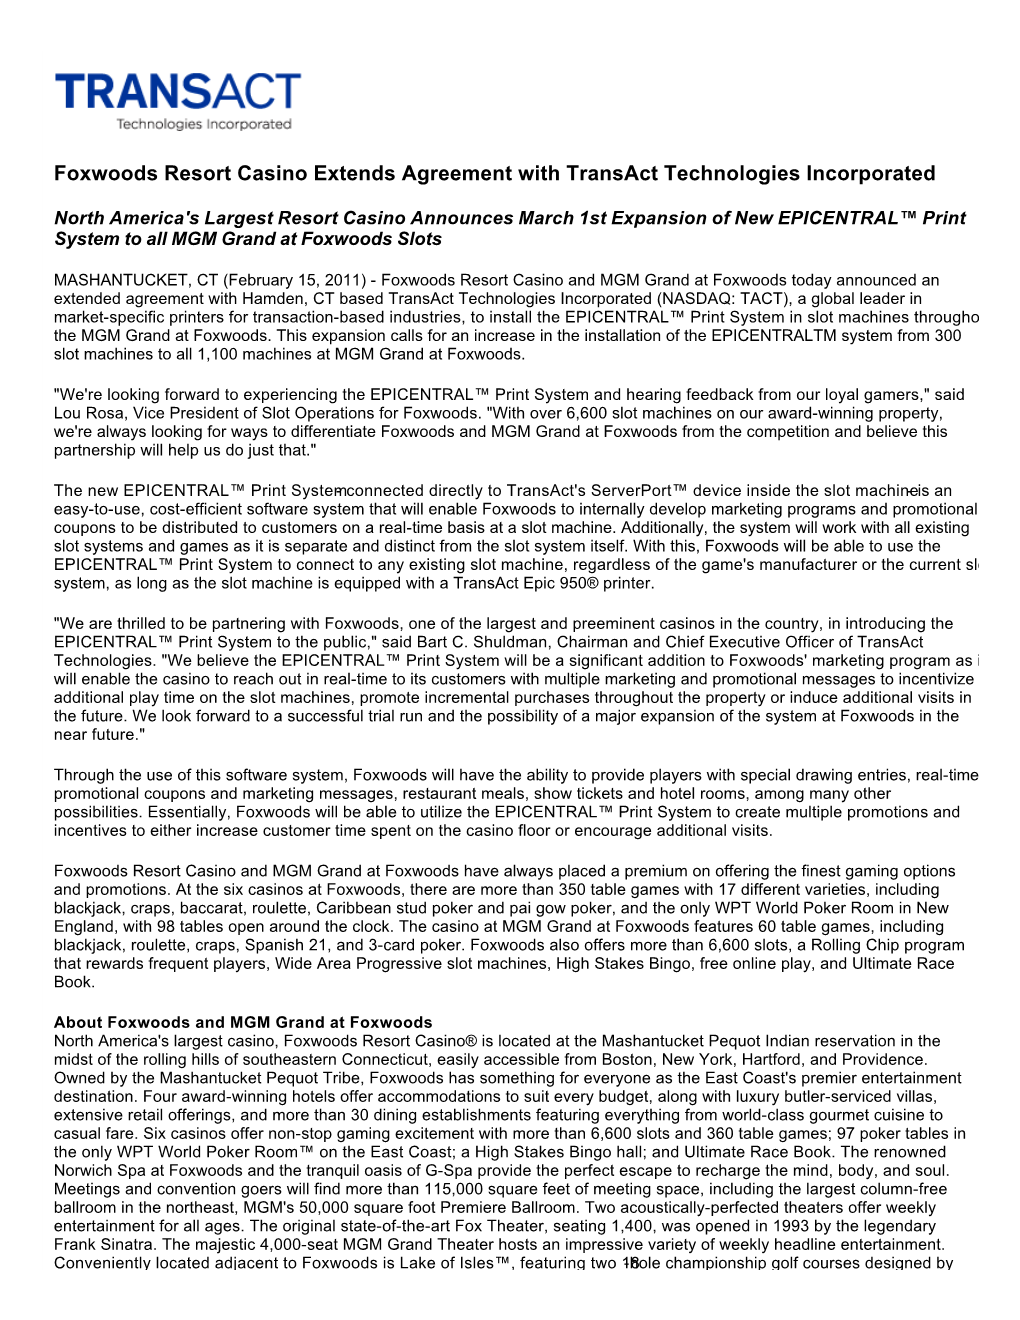 Foxwoods Resort Casino Extends Agreement with Transact Technologies Incorporated